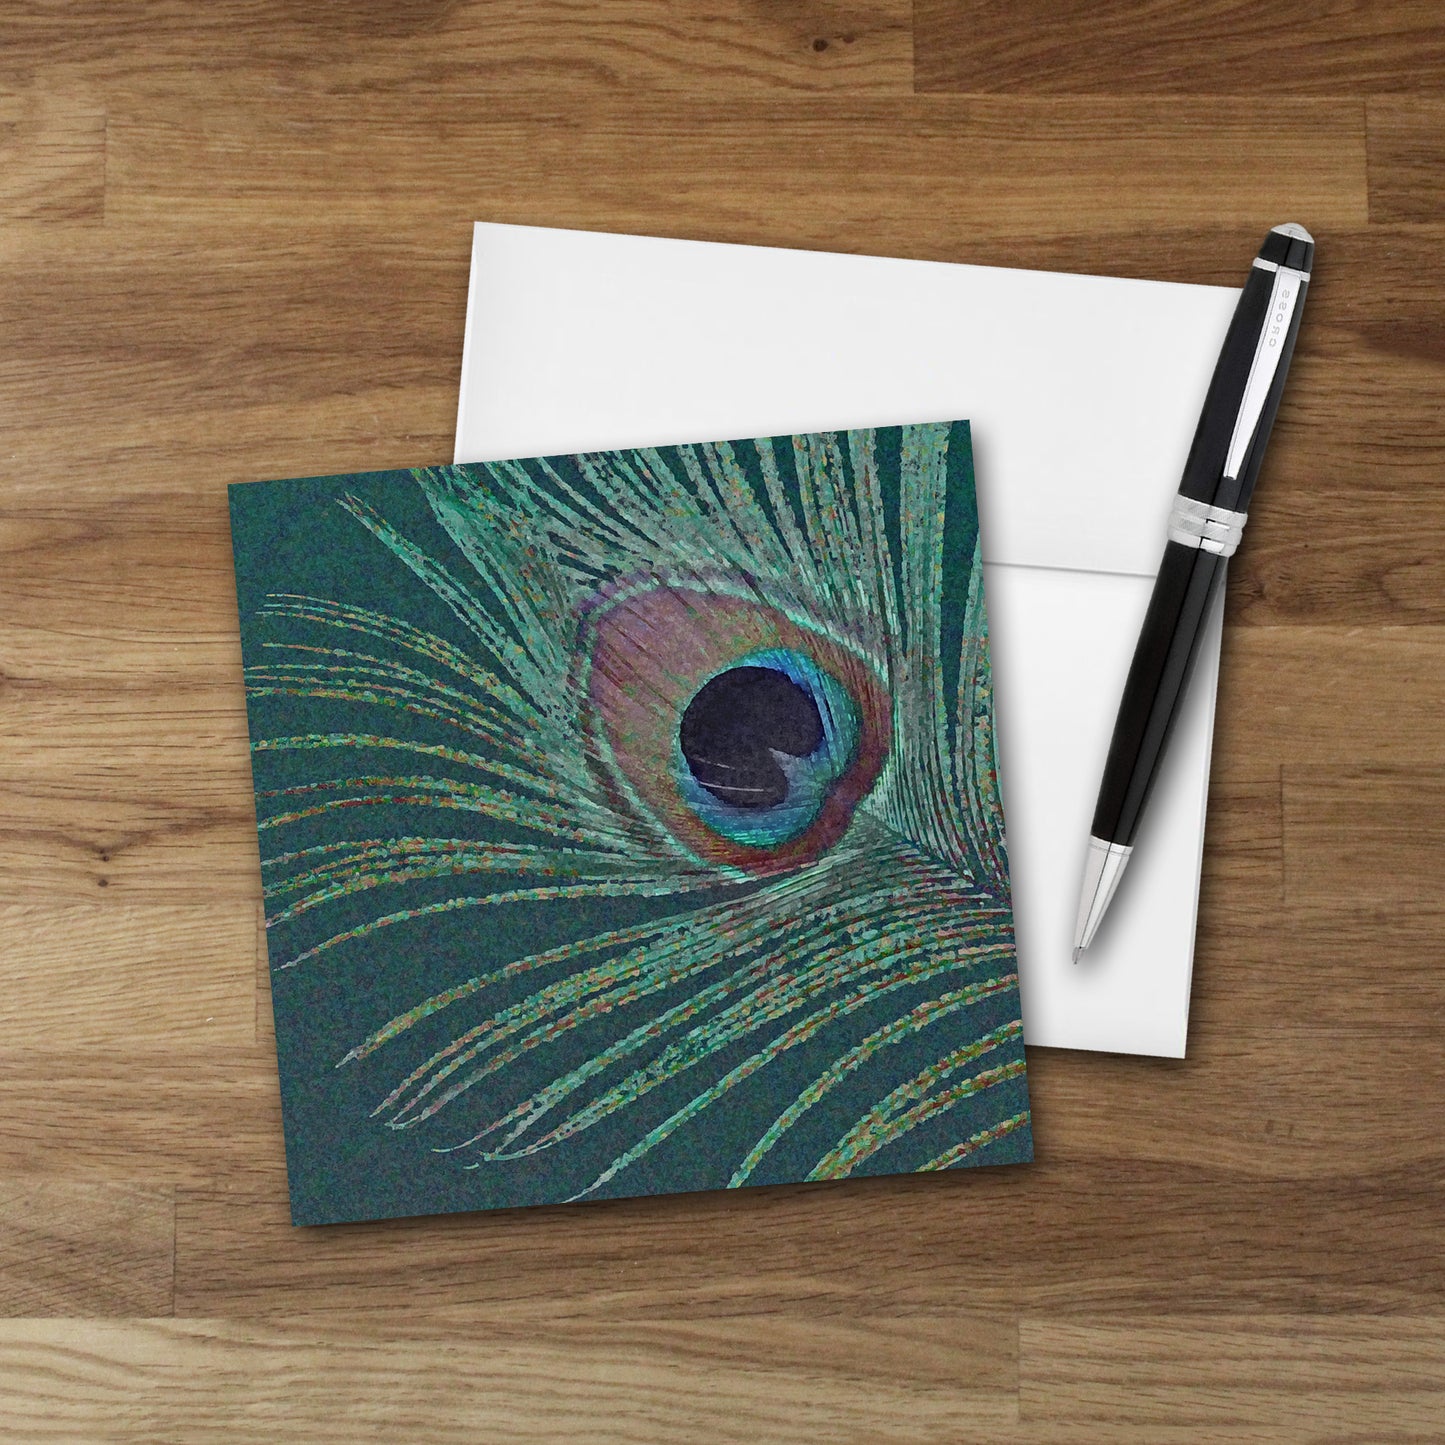 Set of 4 Peacock Feather Designer Greeting Cards